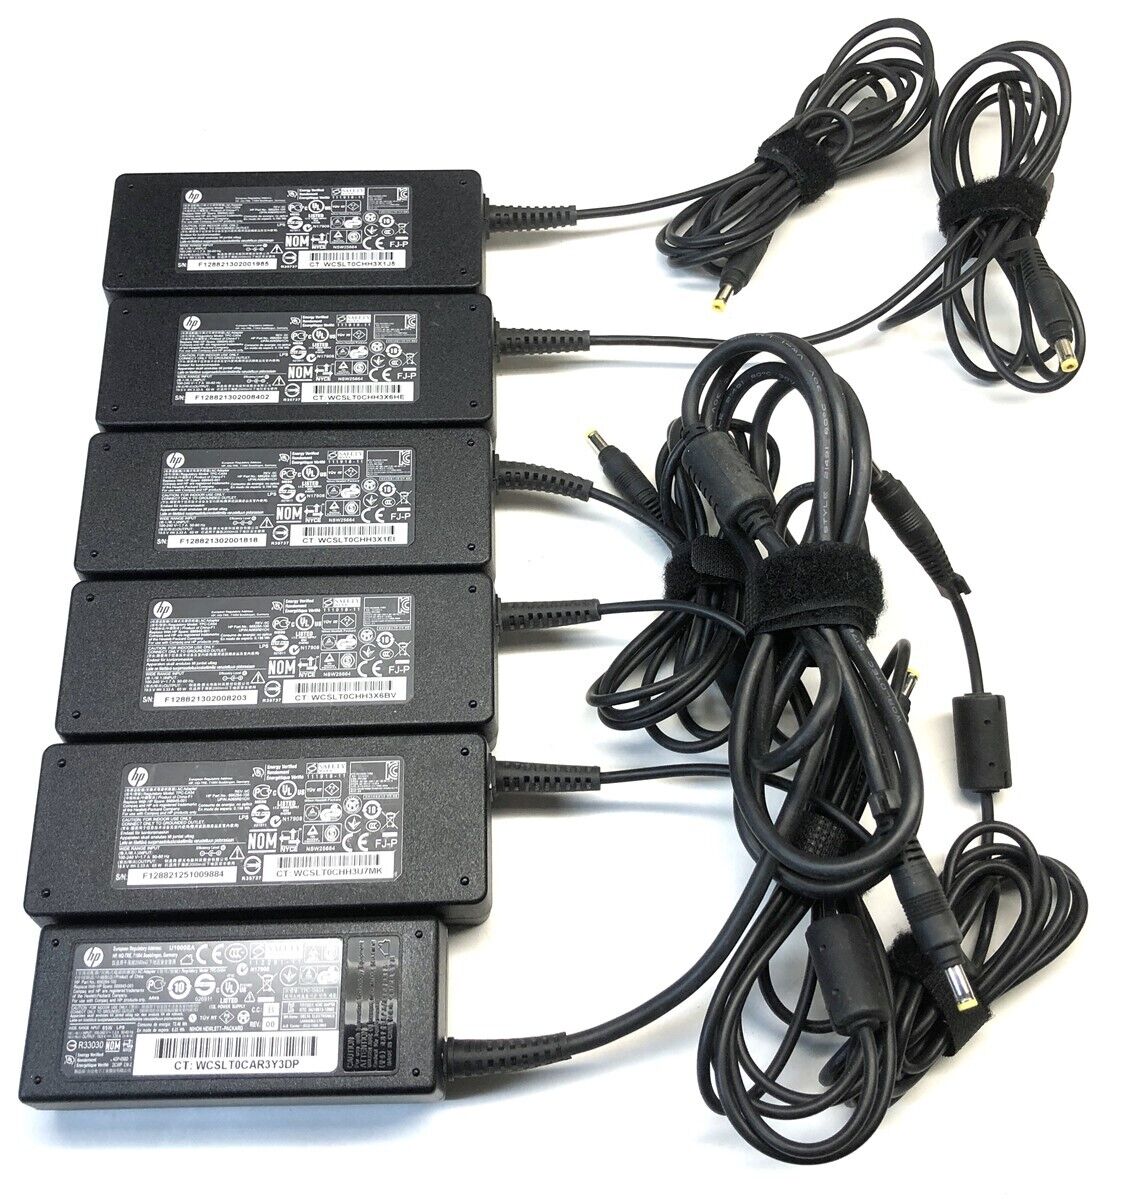 Lot of 6 Genuine HP Laptop Charger AC Power Adapter 666264-100 688945-001 65W 